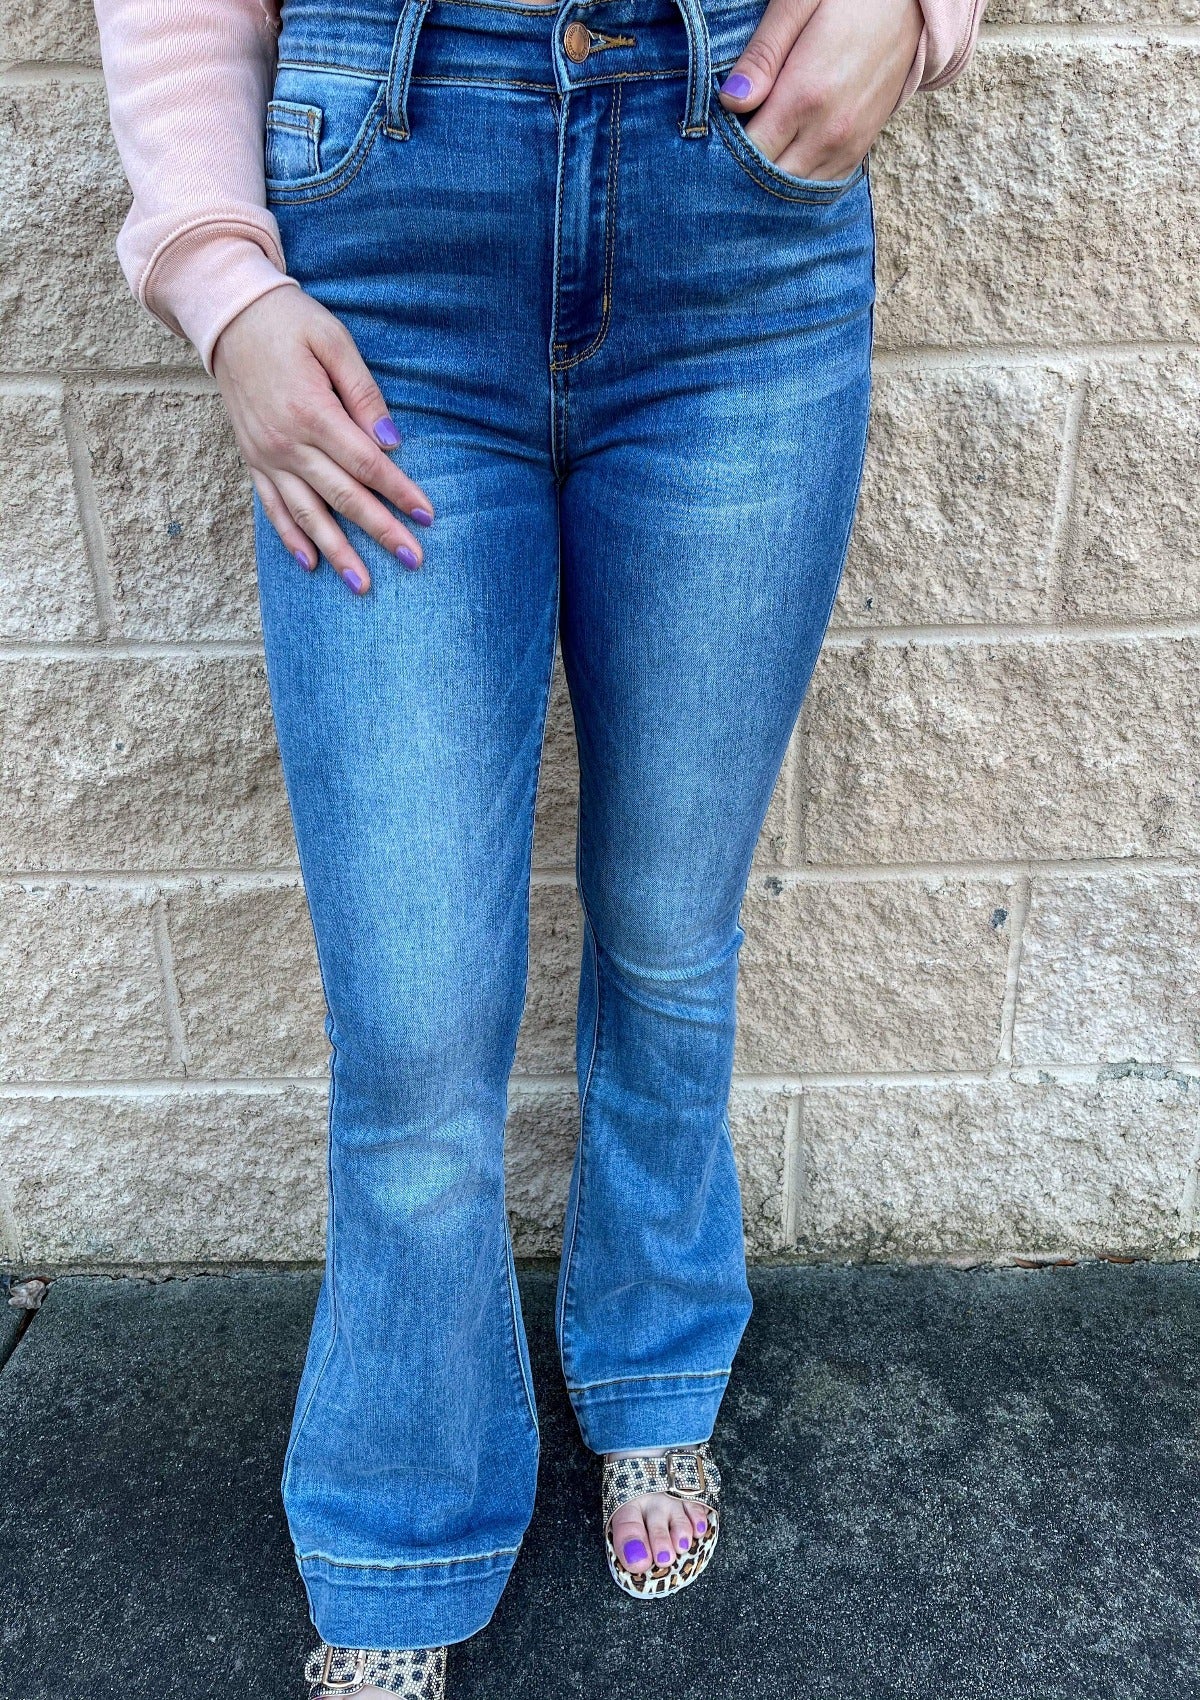 Southern Charm Judy Blue Jeans | Pretty Please Boutique